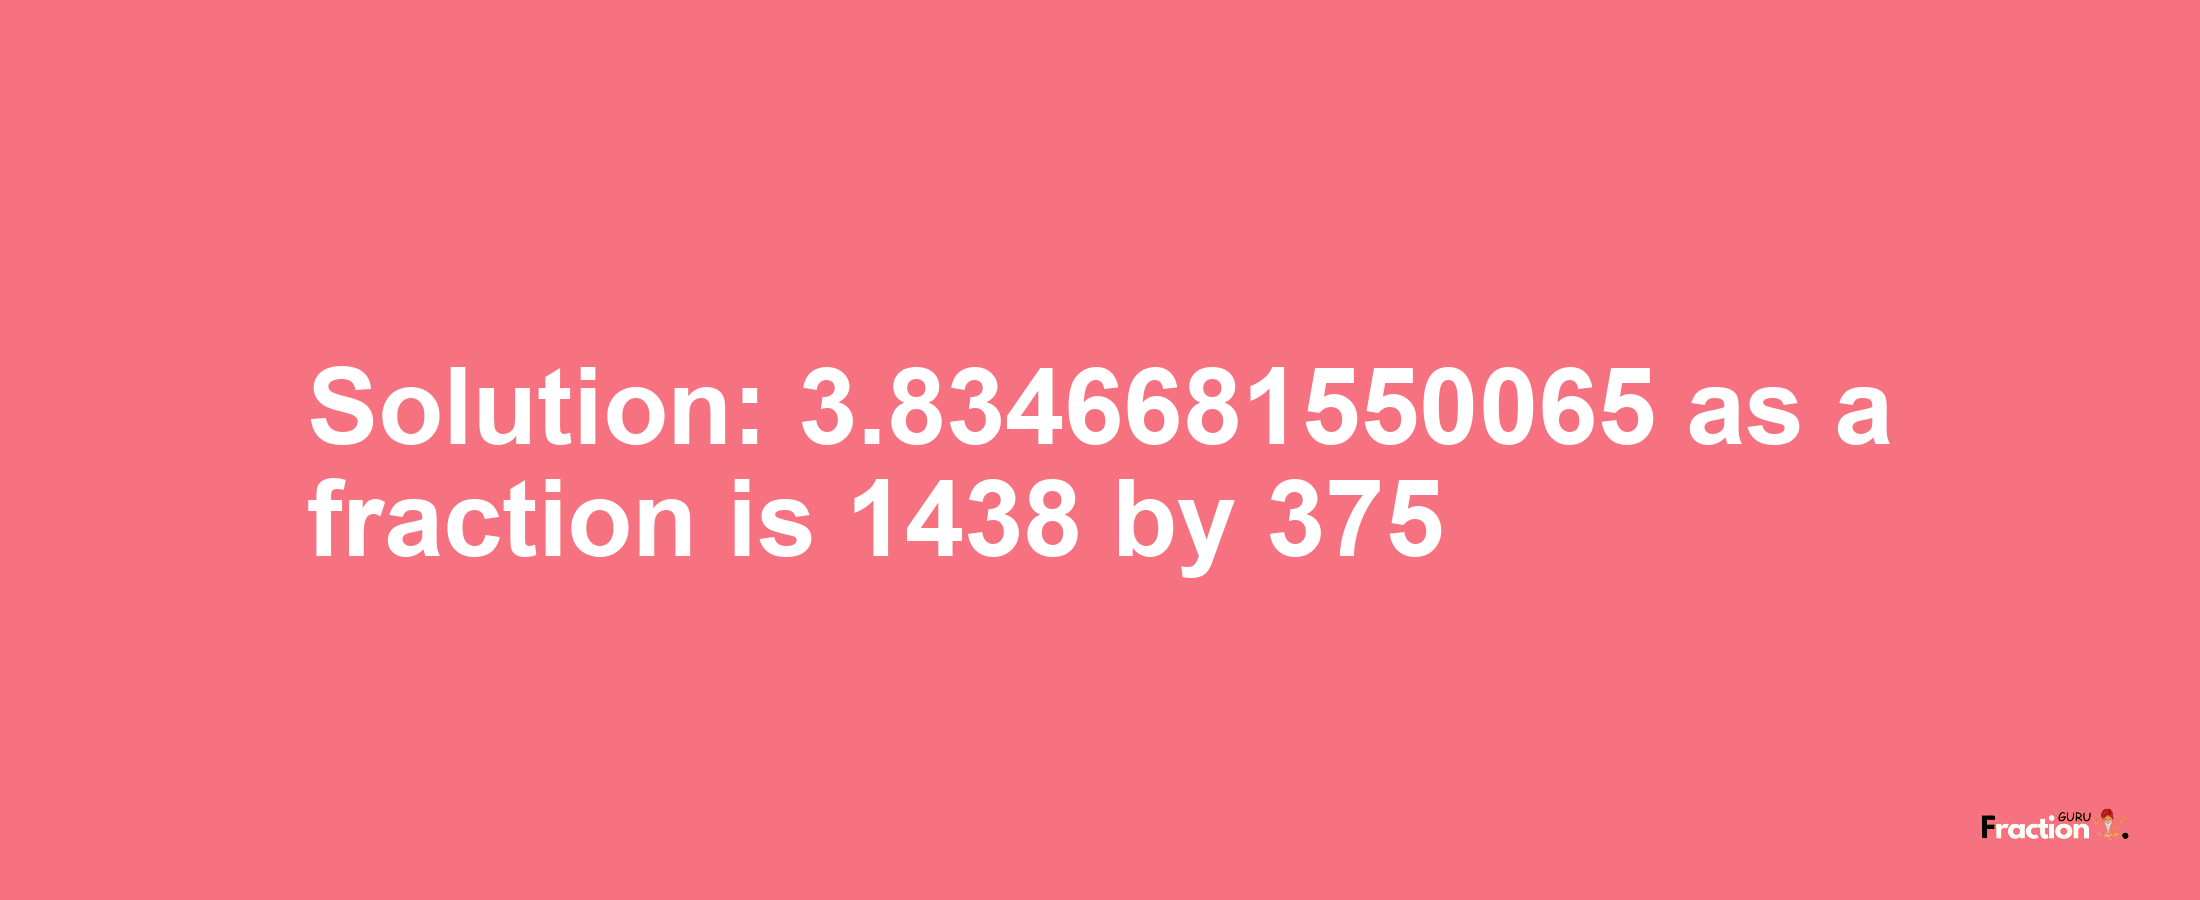 Solution:3.8346681550065 as a fraction is 1438/375